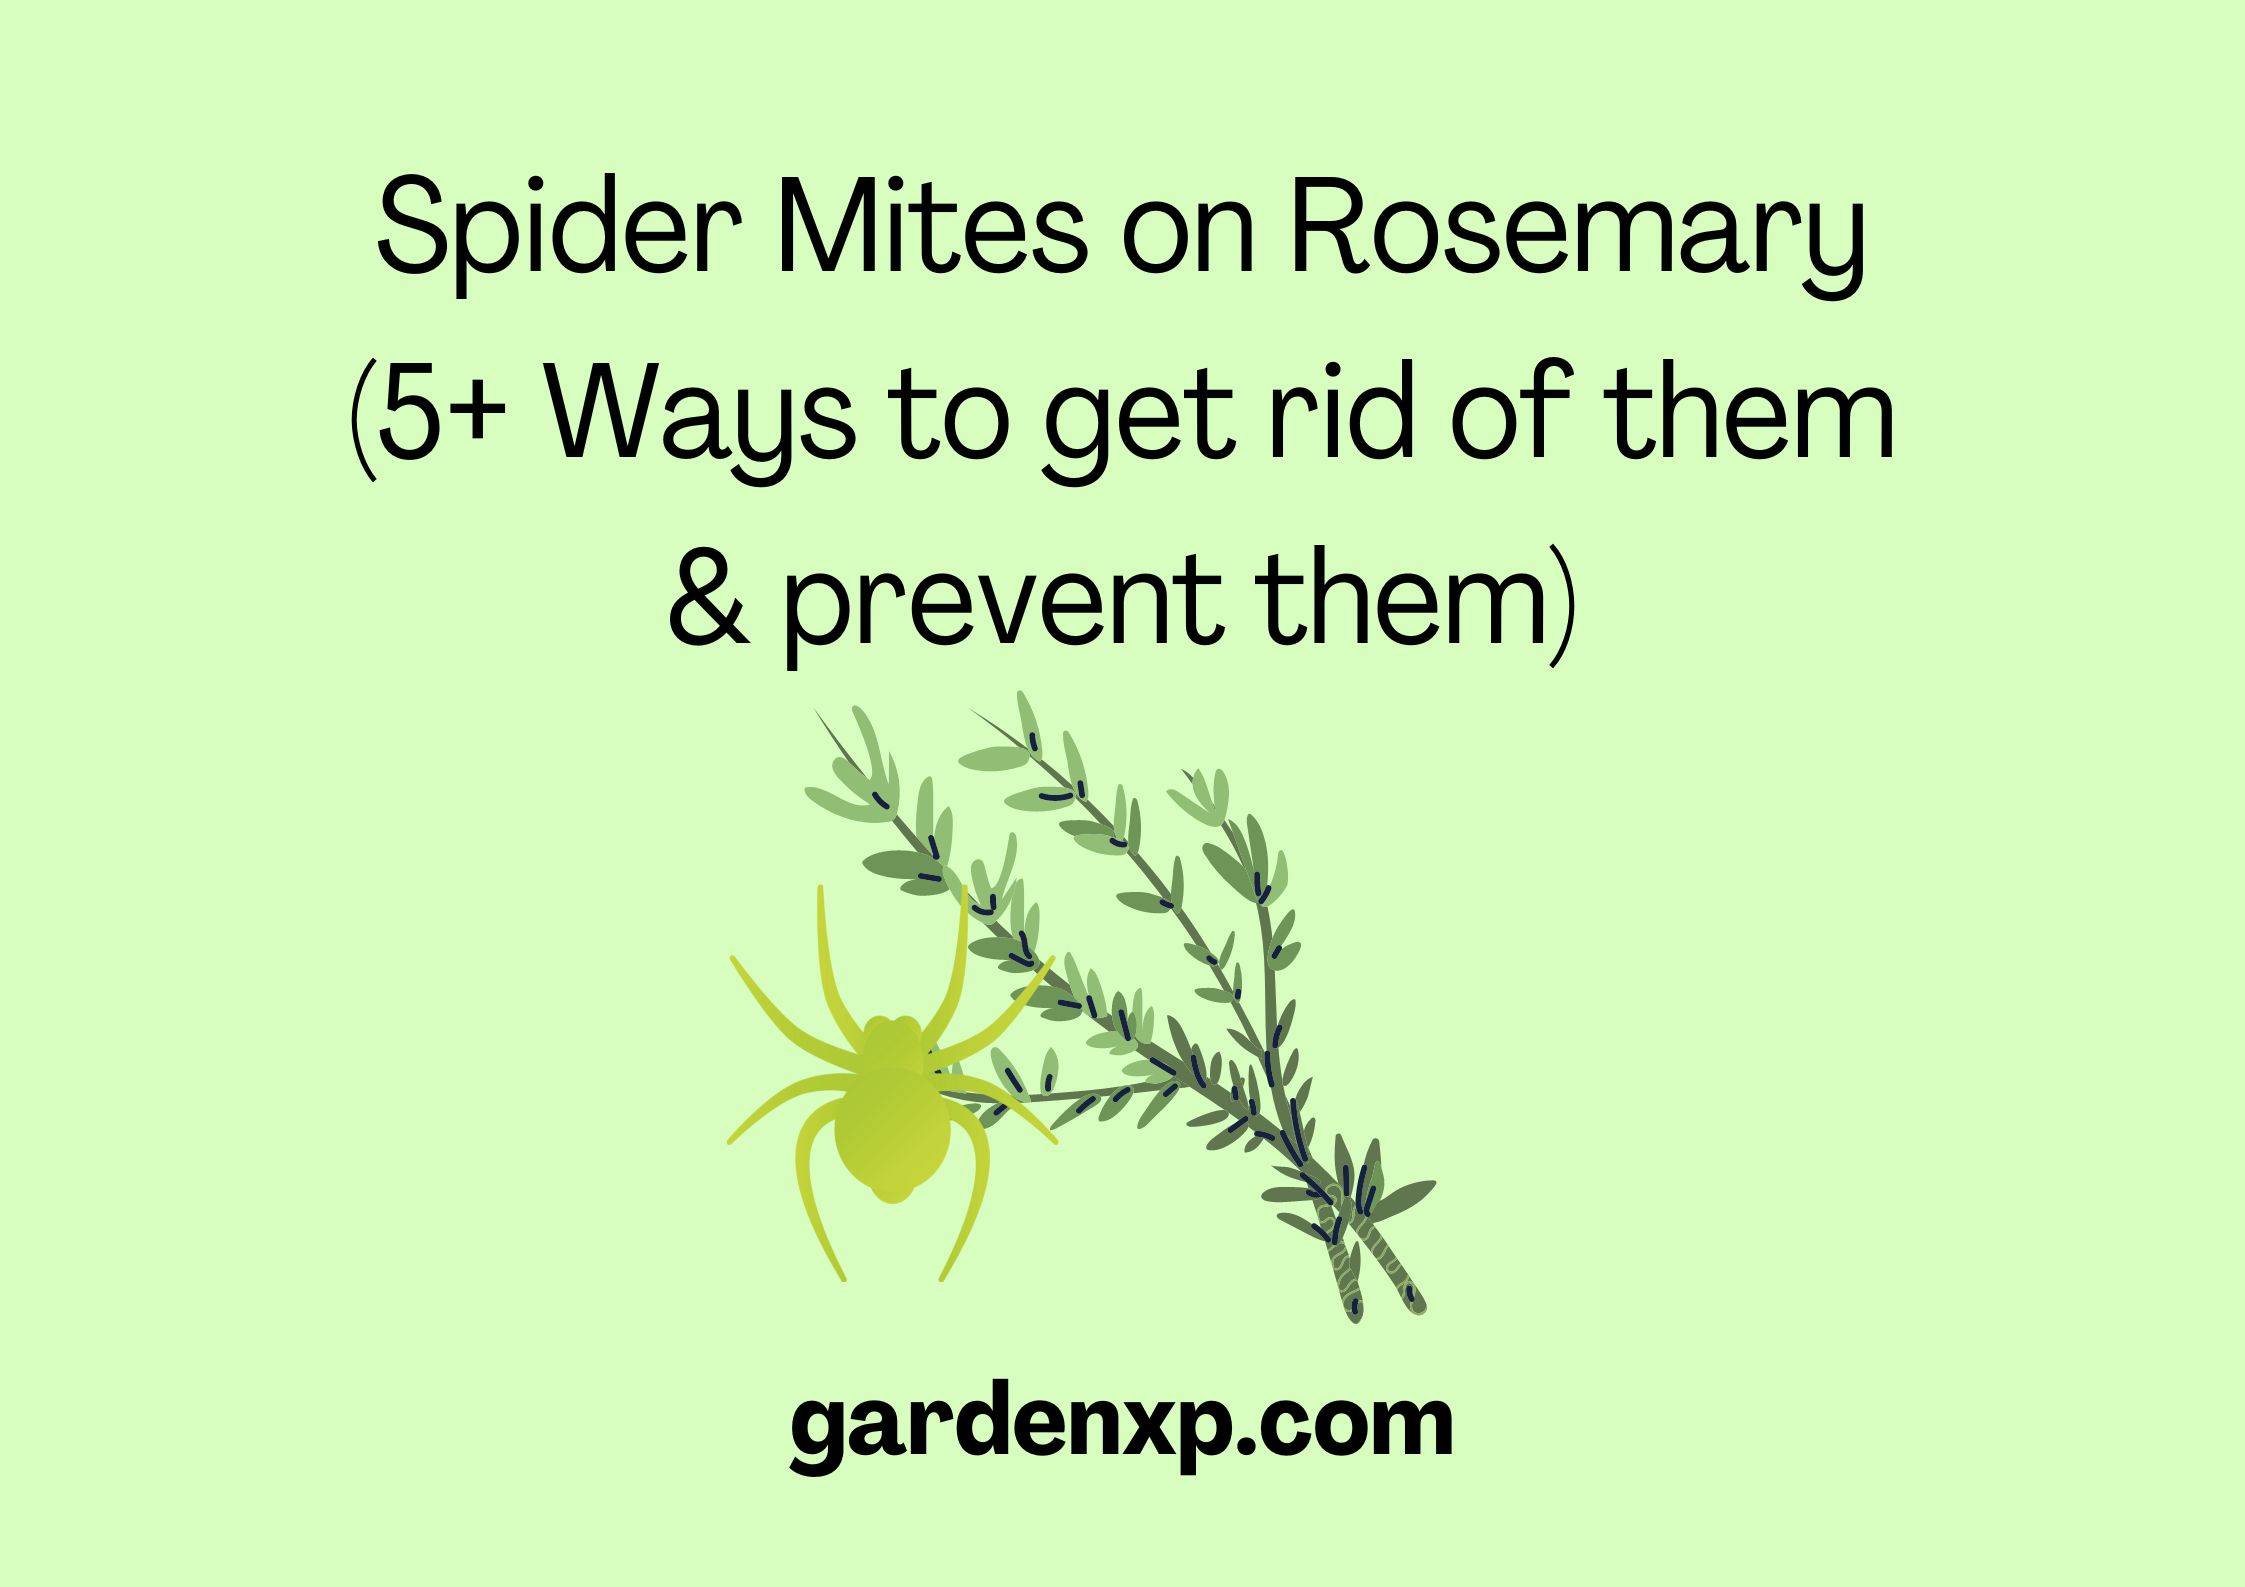 Spider Mites on Rosemary (5+ Ways to get rid of them & prevent them)